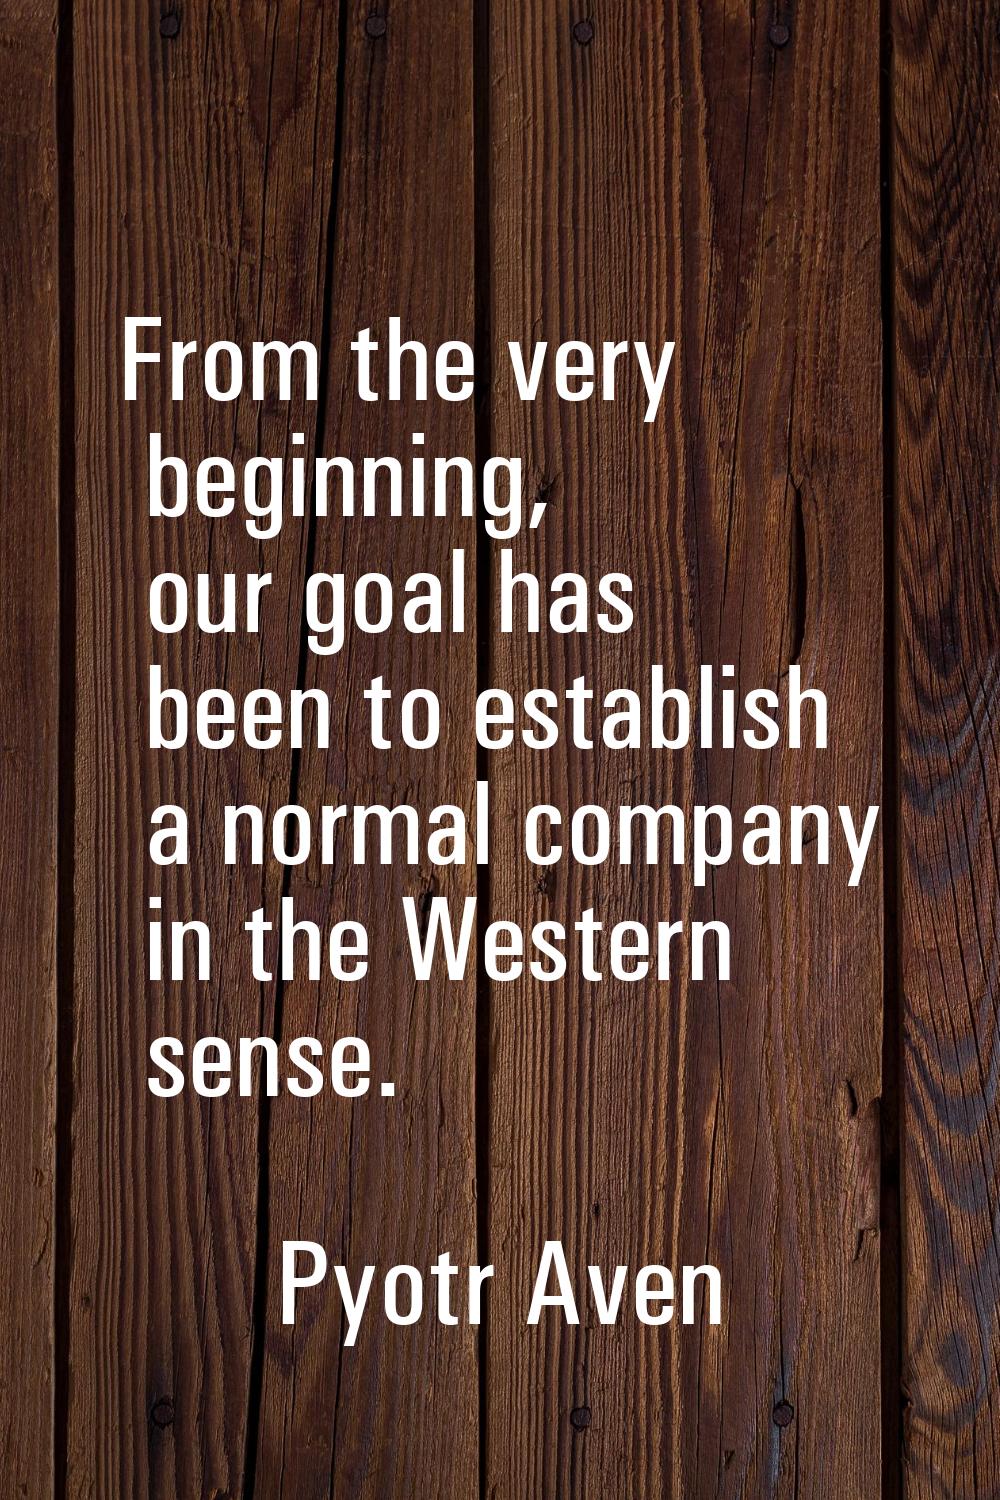 From the very beginning, our goal has been to establish a normal company in the Western sense.